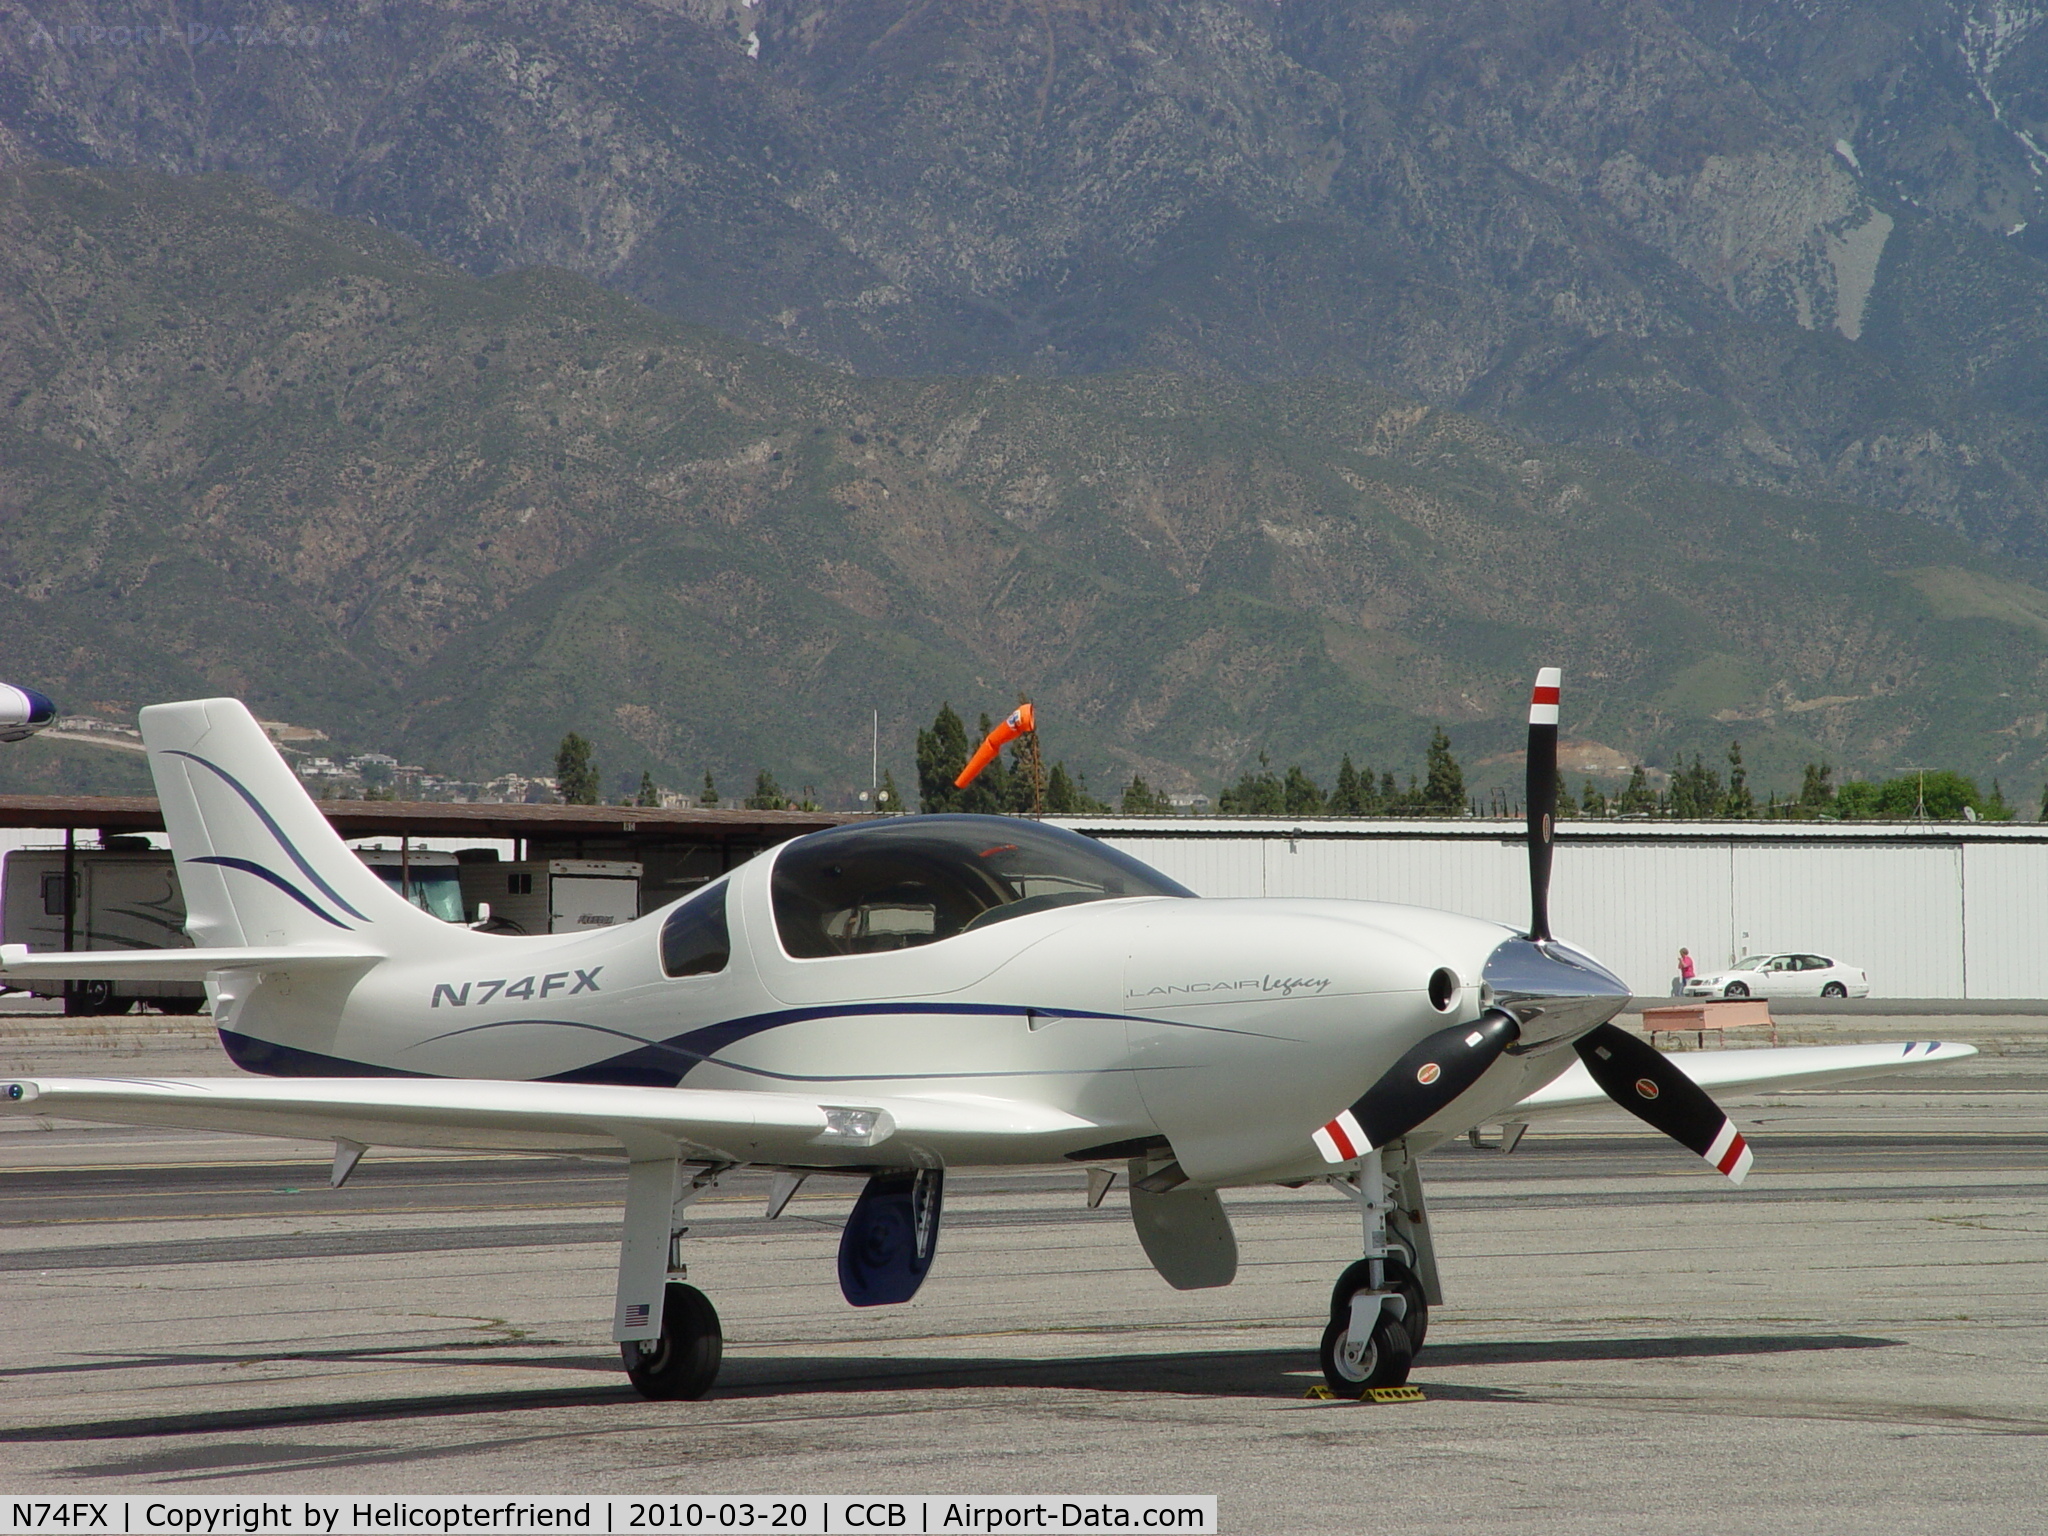 N74FX, 2007 Lancair Legacy C/N L2K-283, Parked at Cable